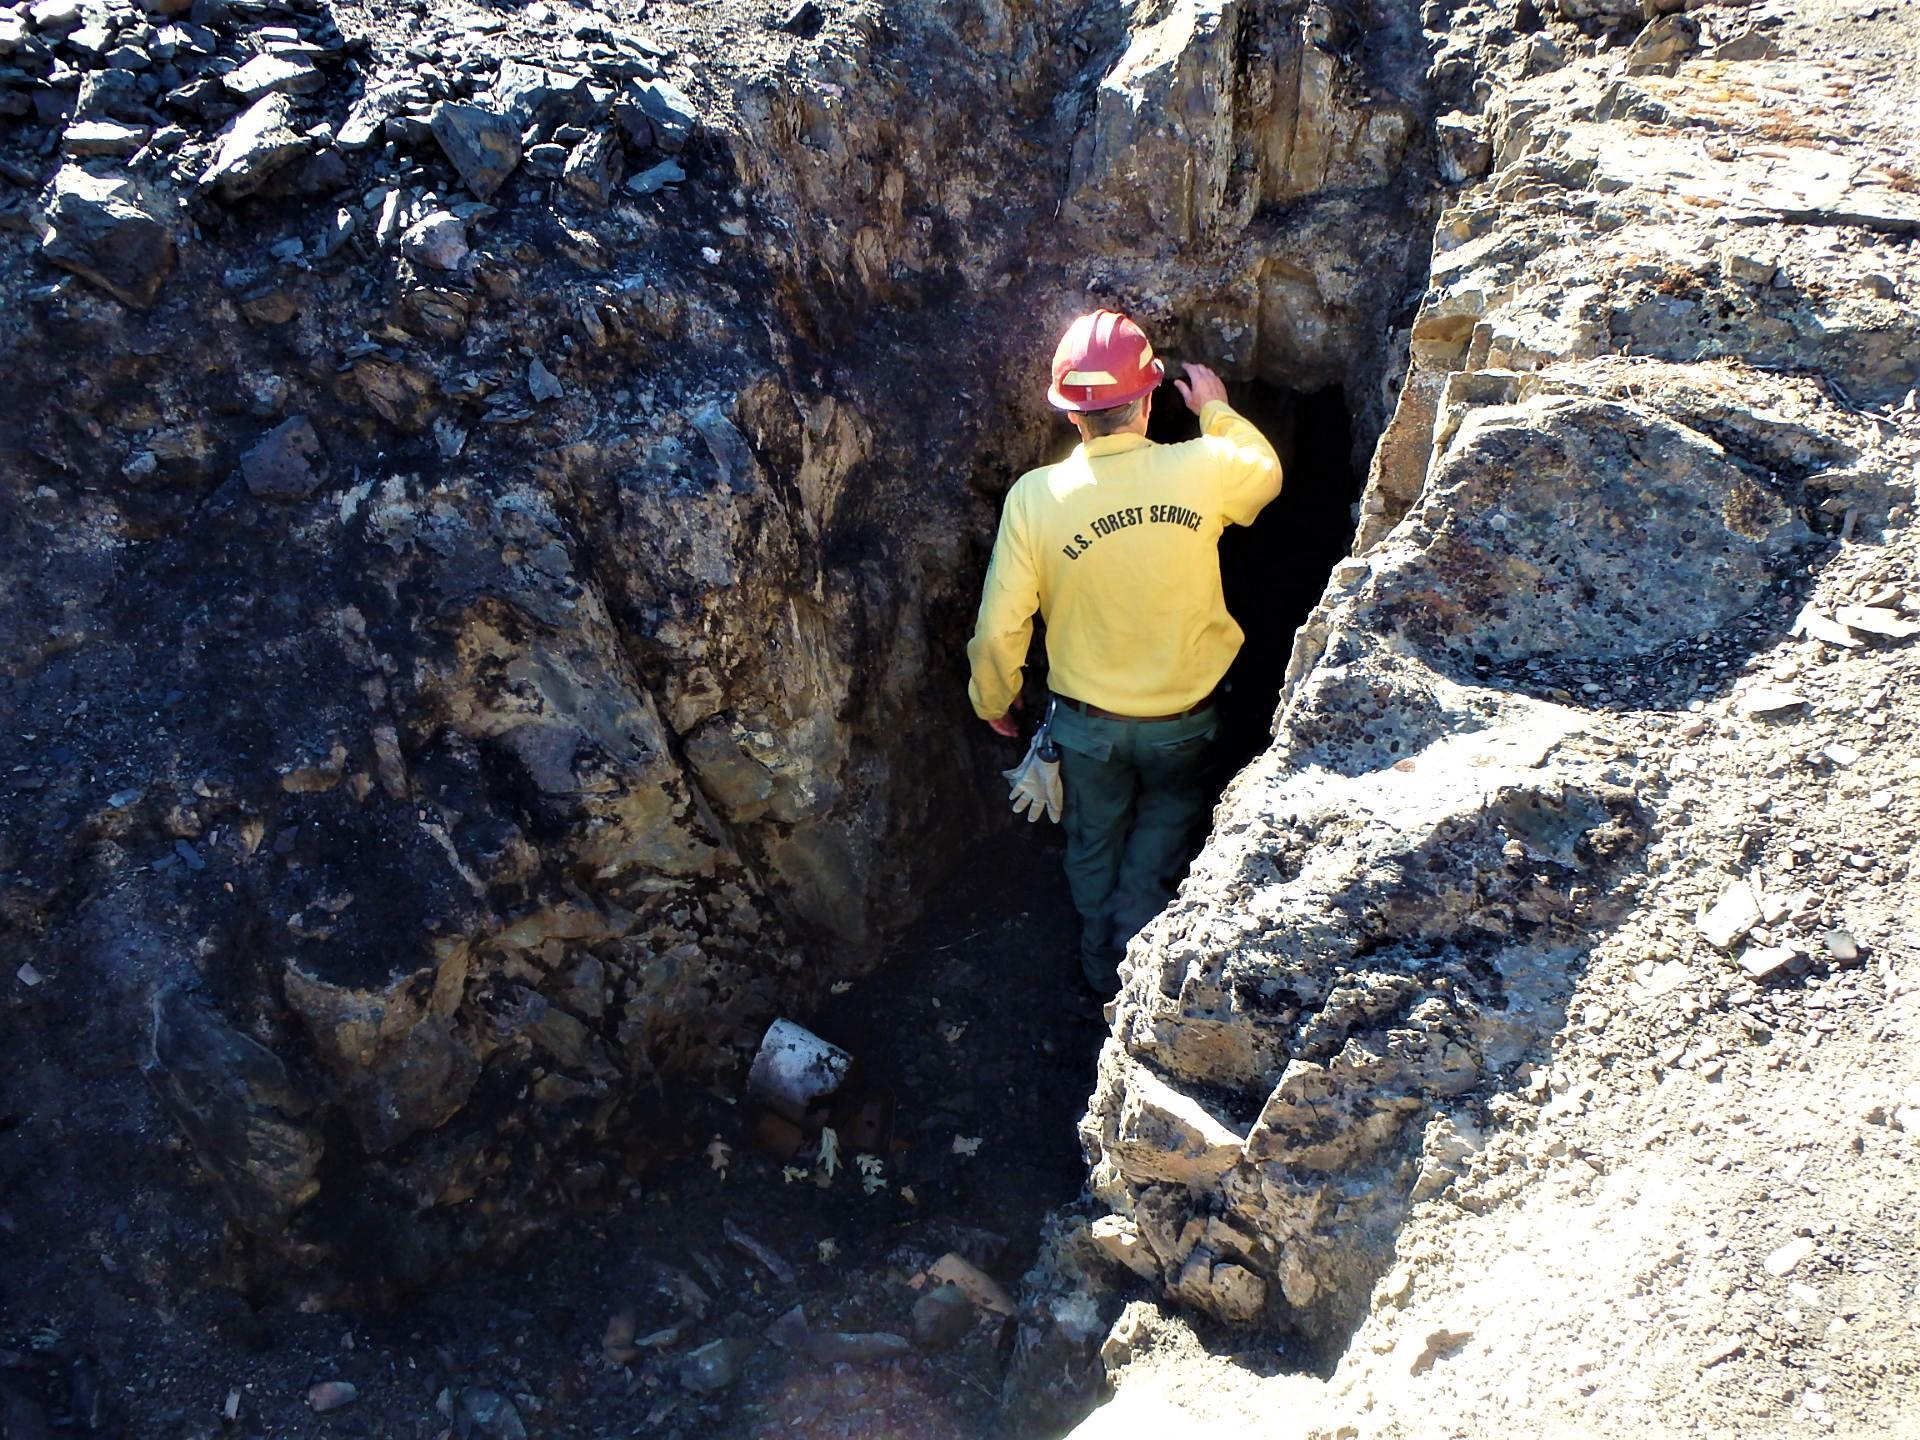 Image showing BAER environmental geologist Rick Weave assessing an abandoned mine opening opening near the Gorman Ranch Road, previously unknown that is now a threat to public safety in the Mosquito burned area